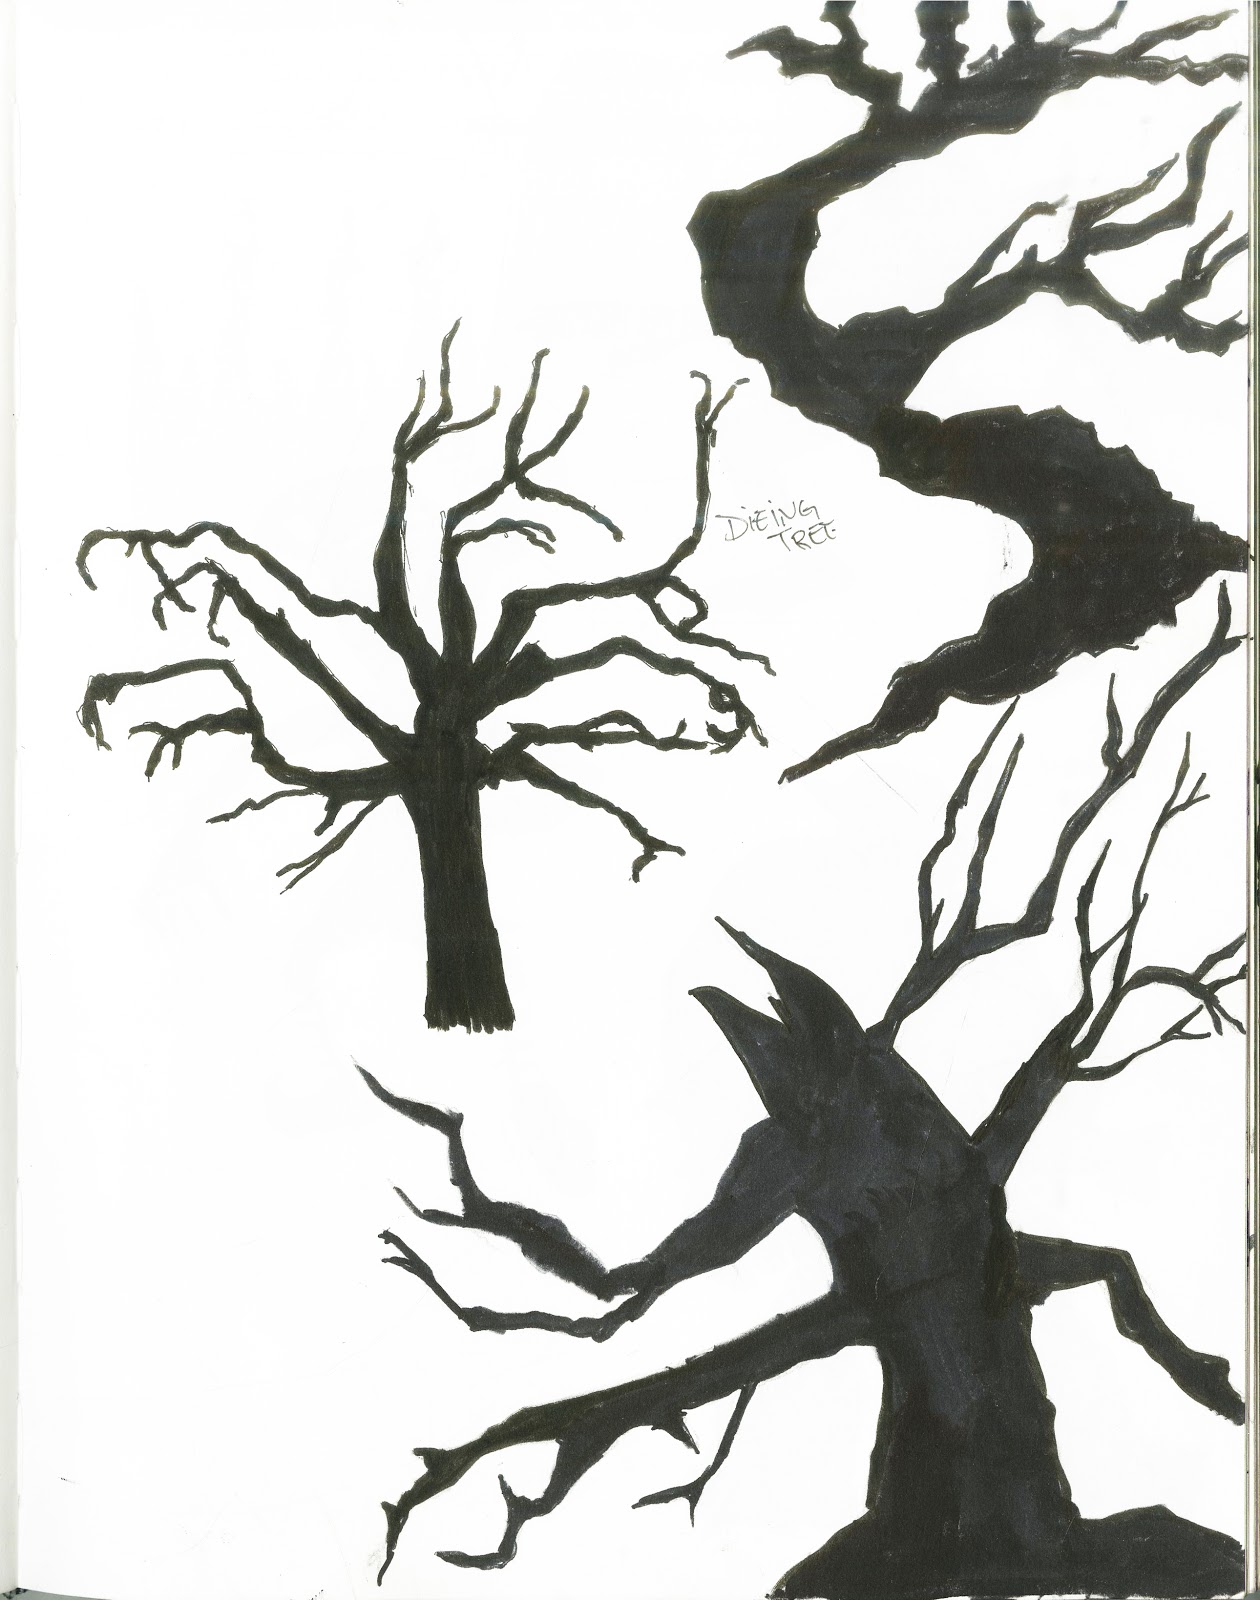 Creepy Dead Tree Drawing - ClipArt Best - ClipArt Best